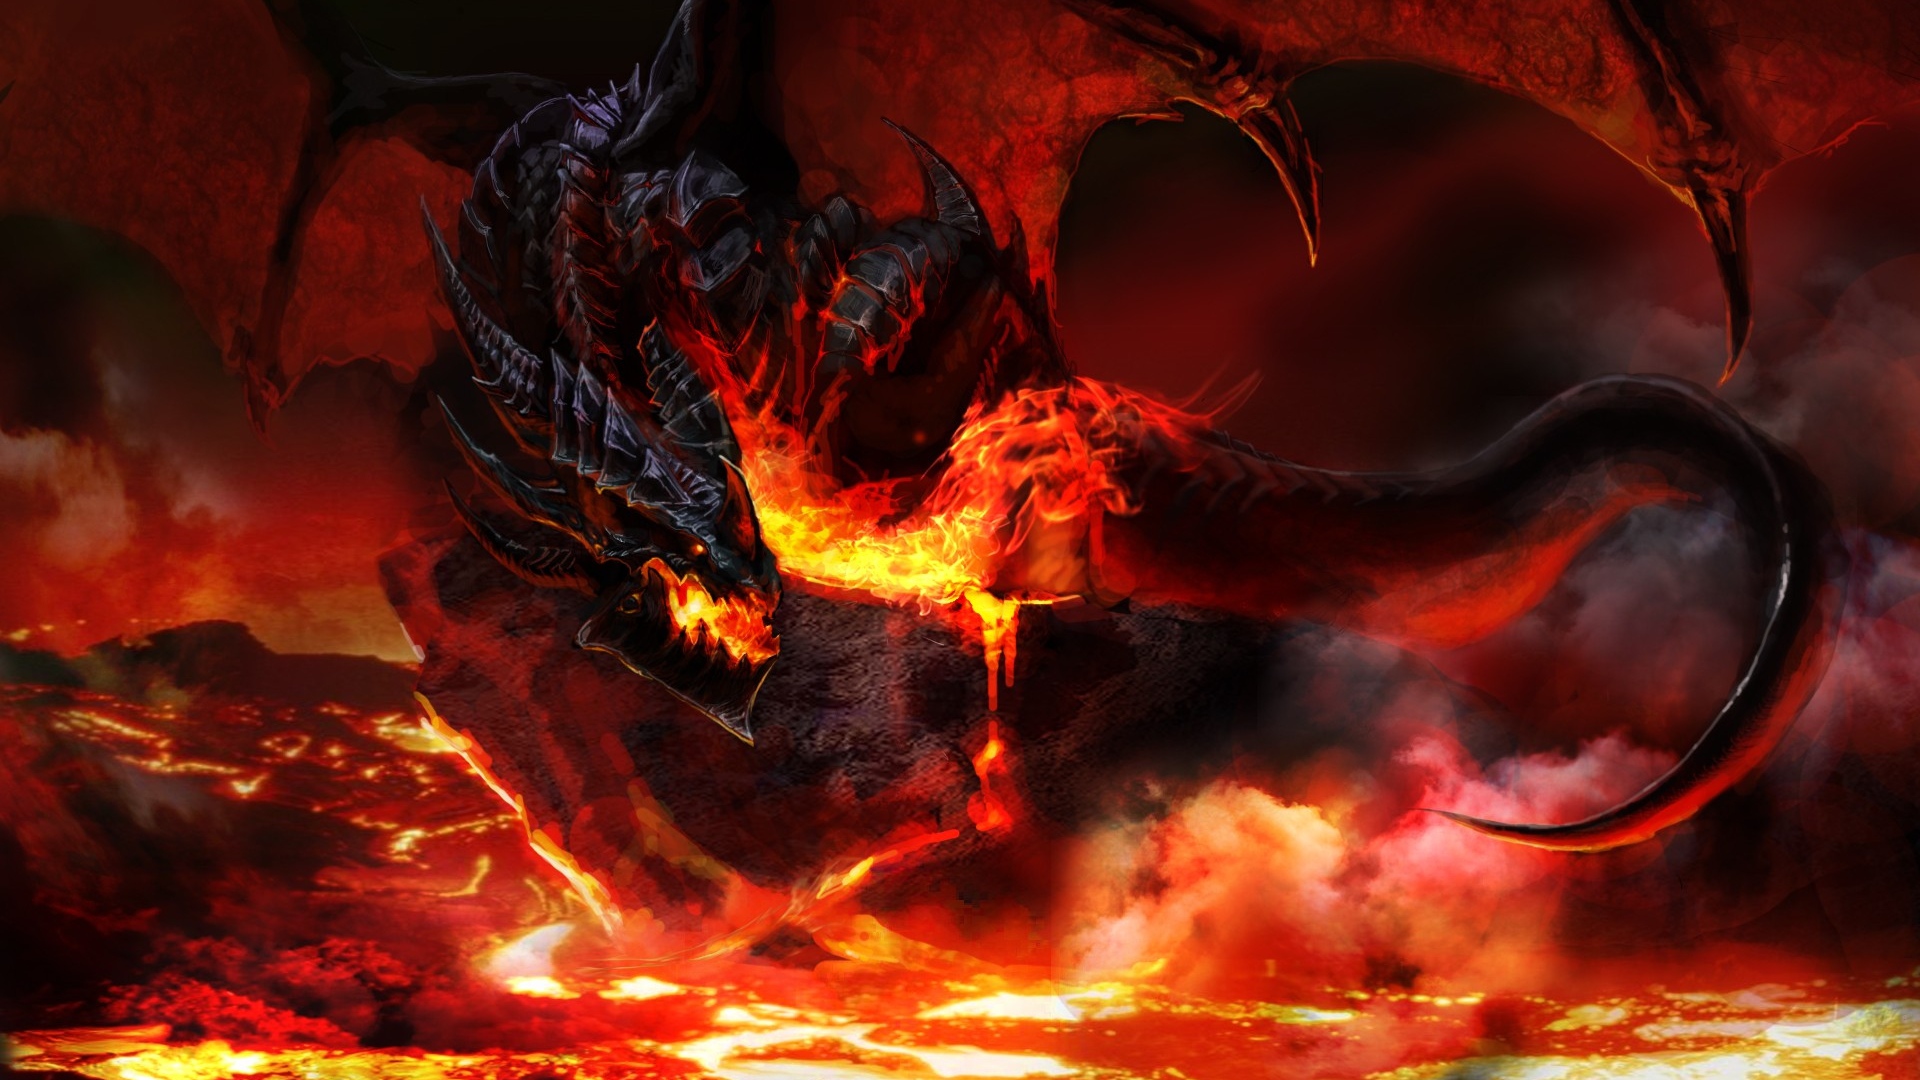 Of Warcraft Dragon Fire Tail Wallpaper Background Full HD 1080p